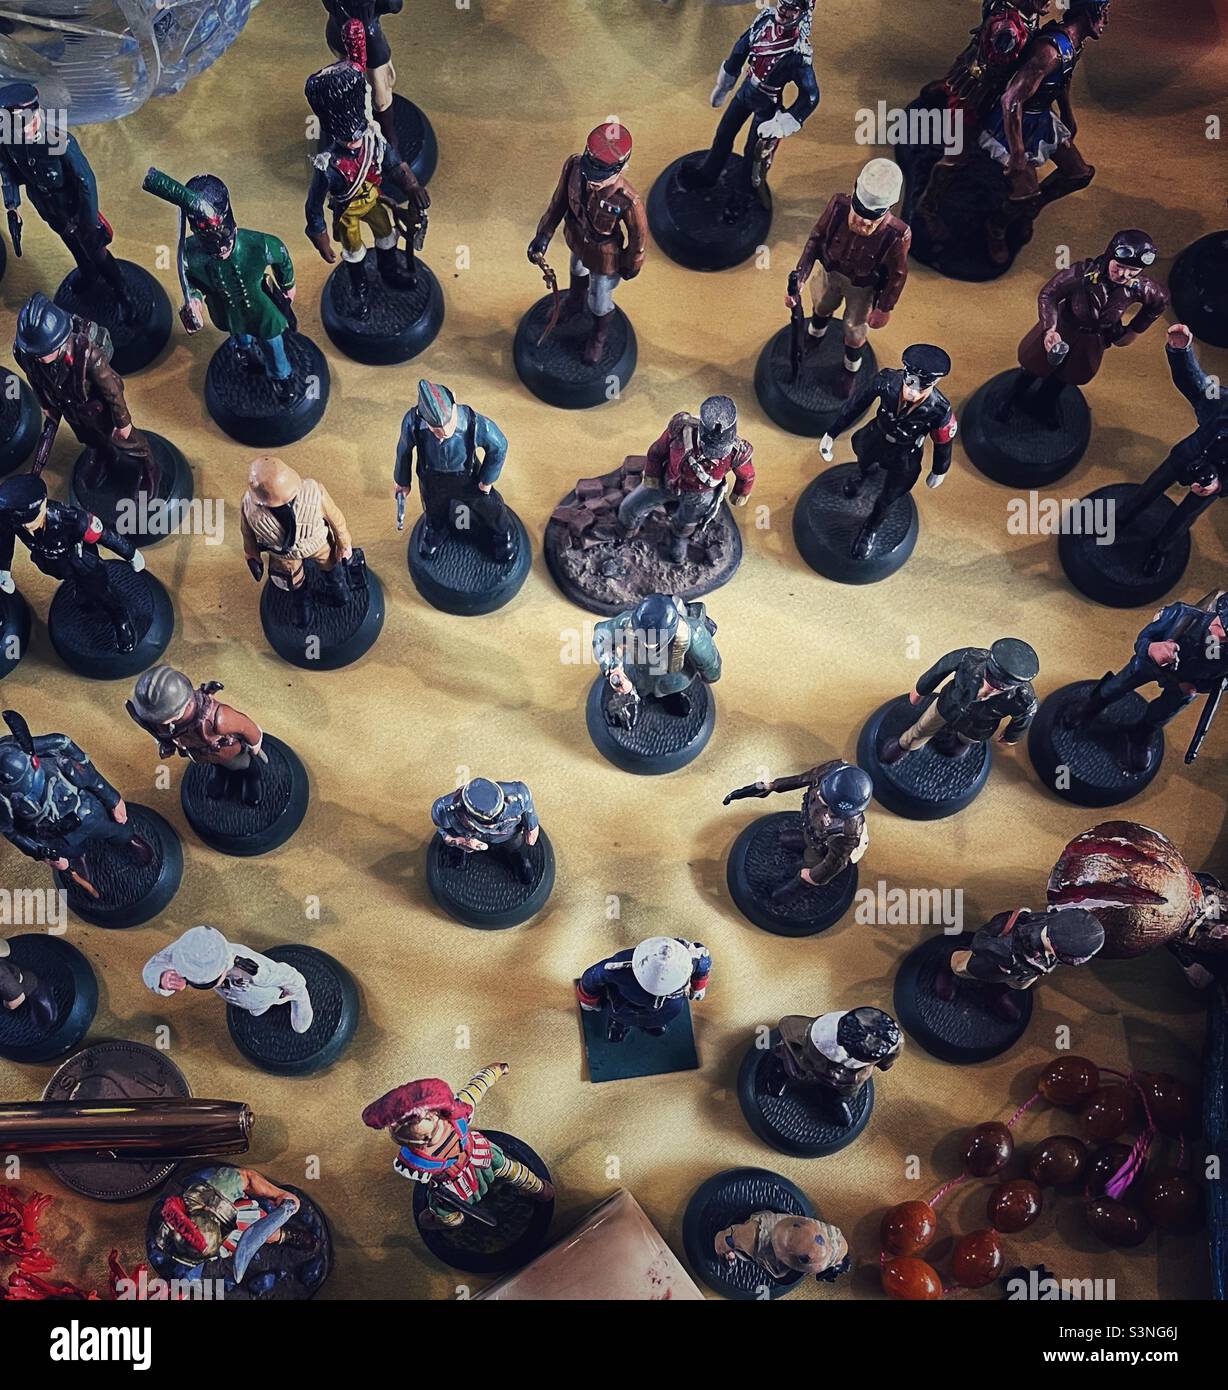 Tin soldiers at a flea market in birds eye perspective from above Stock Photo